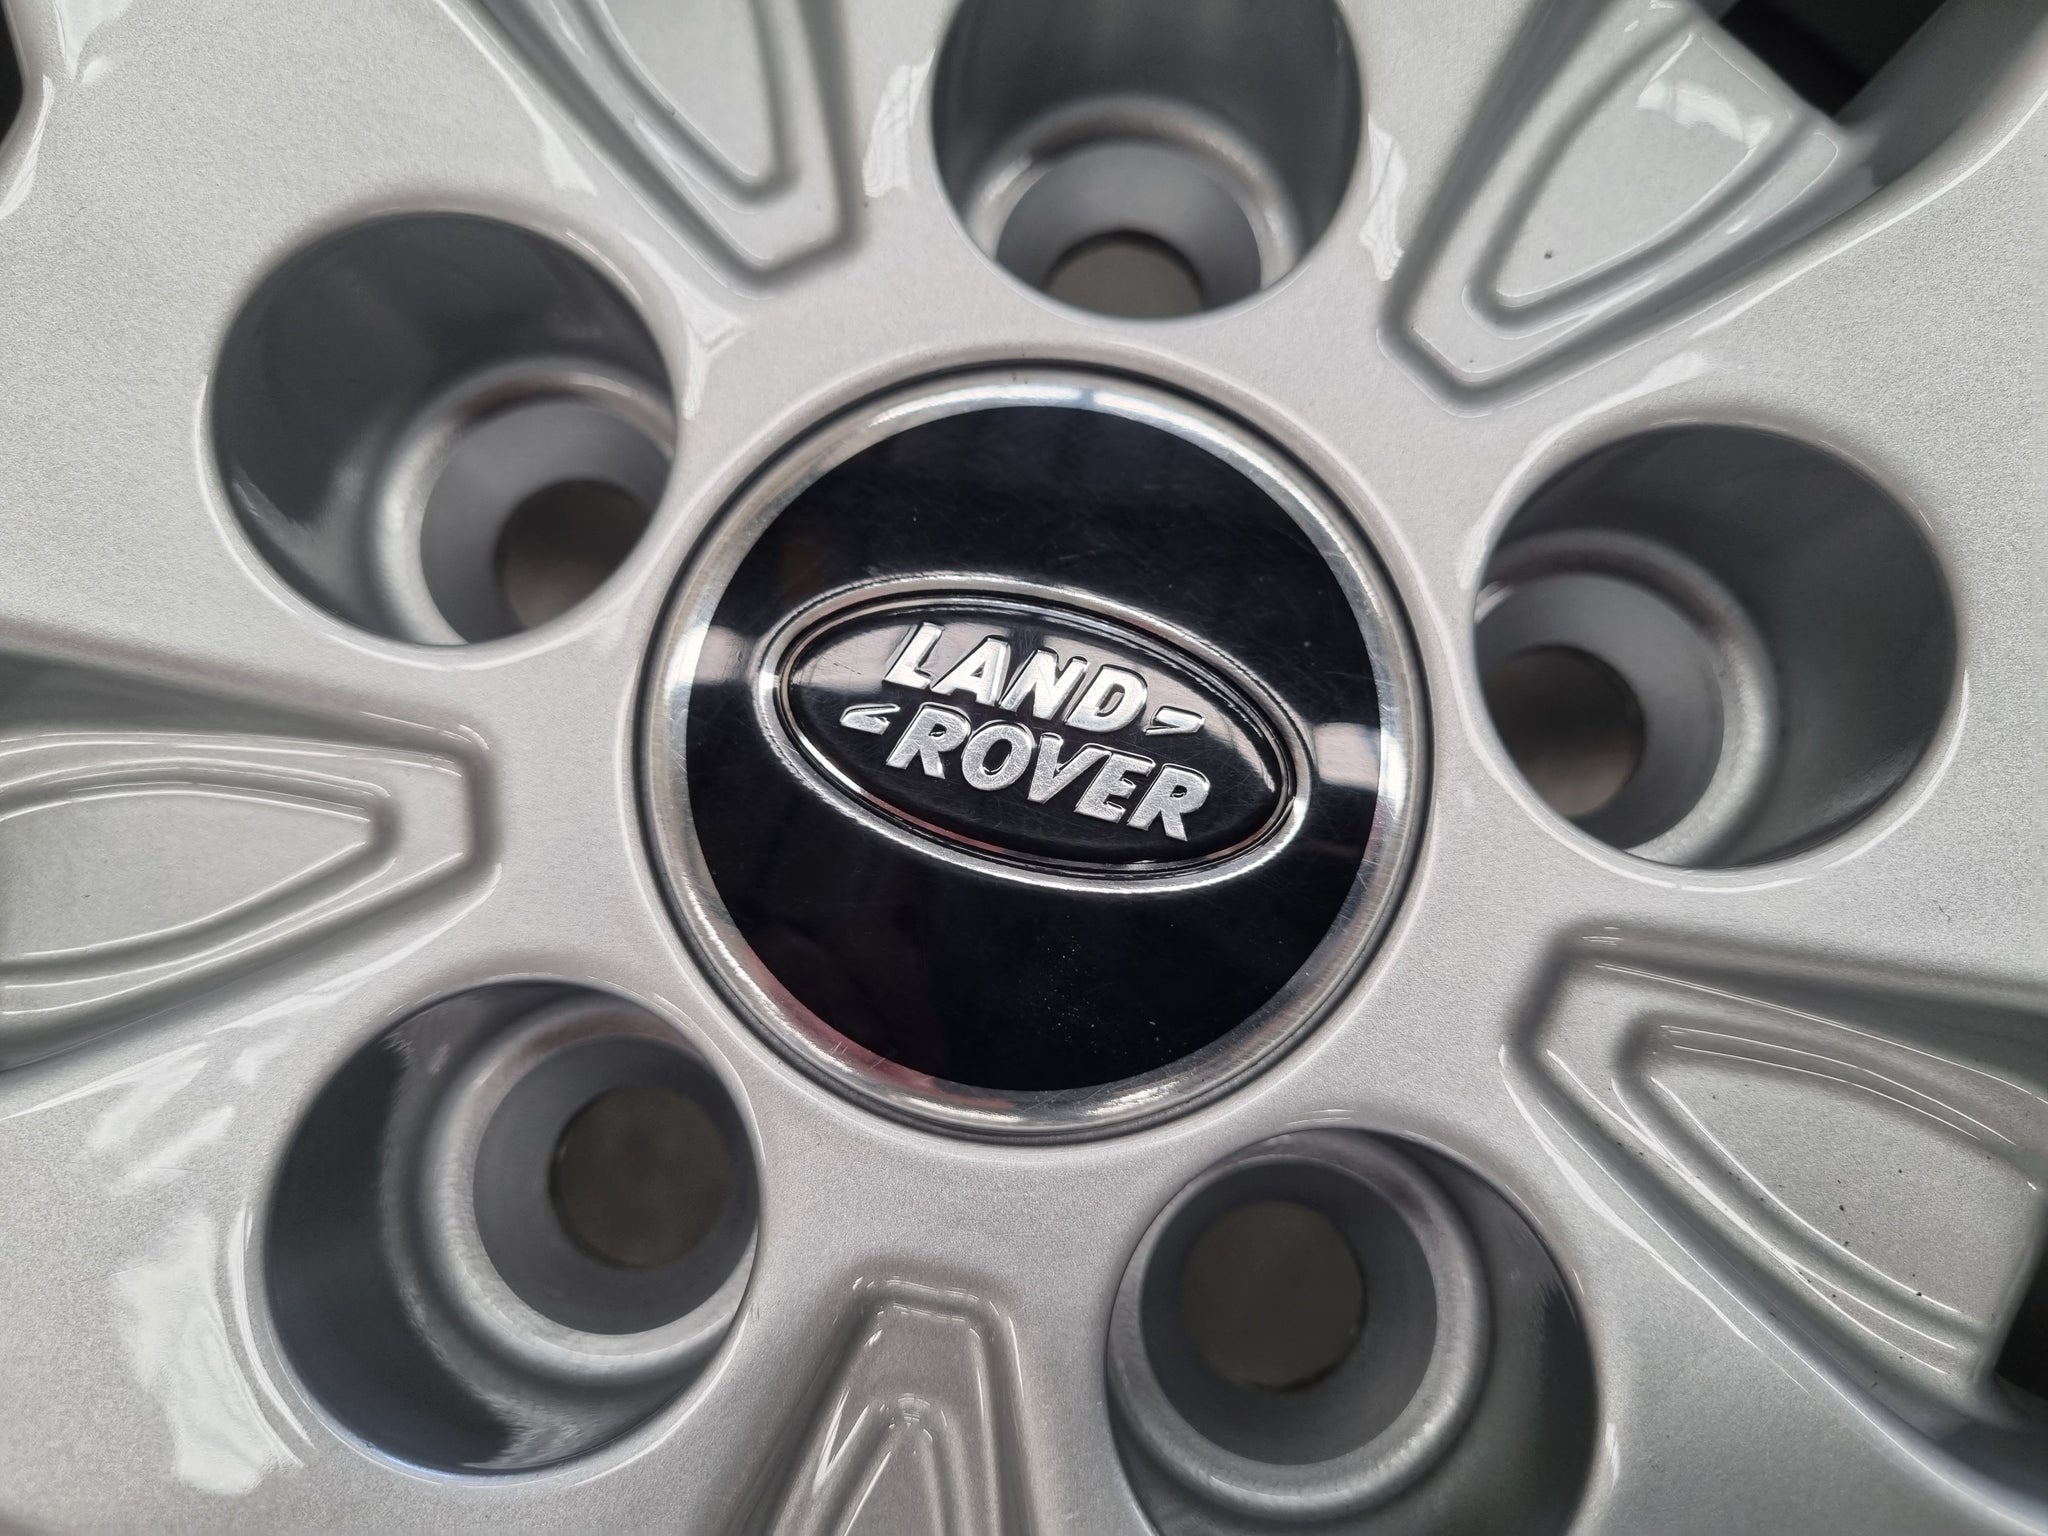 Load image into Gallery viewer, Genuine Range Rover Evoque Silver 20 Inch Alloy Wheels Set of 4
